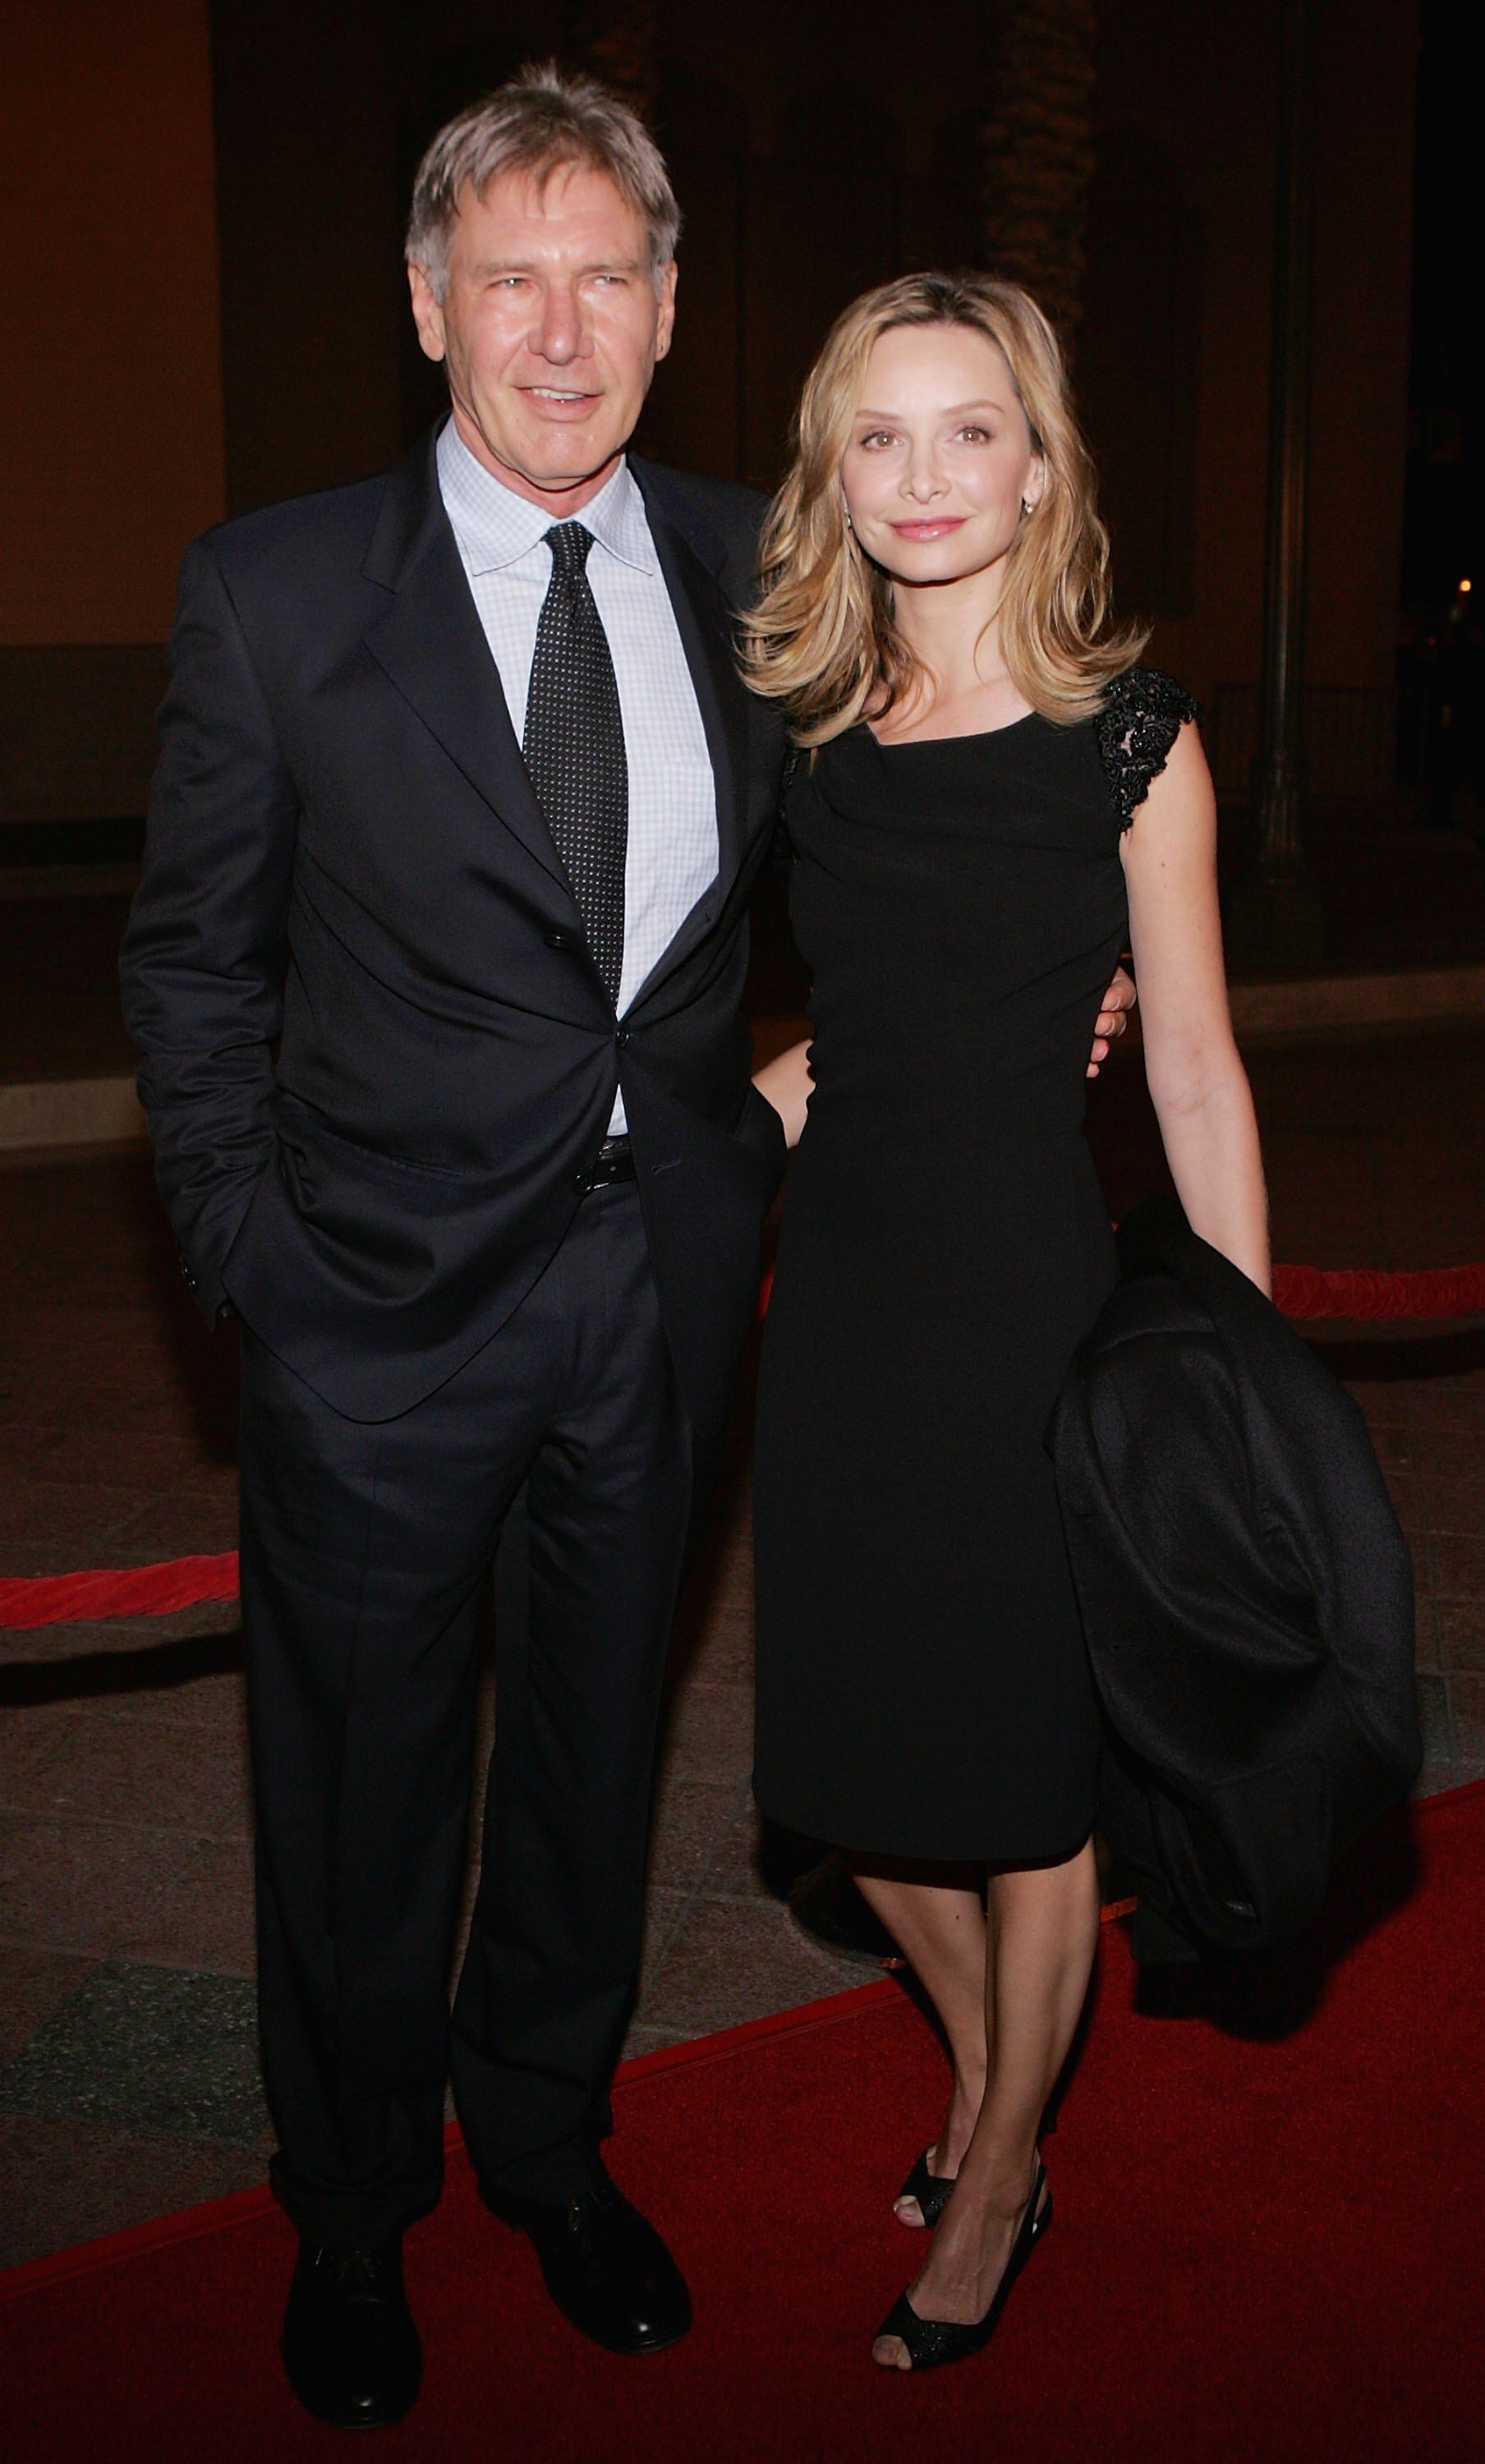 Harrison Ford and Calista Flockhart on the red carpet